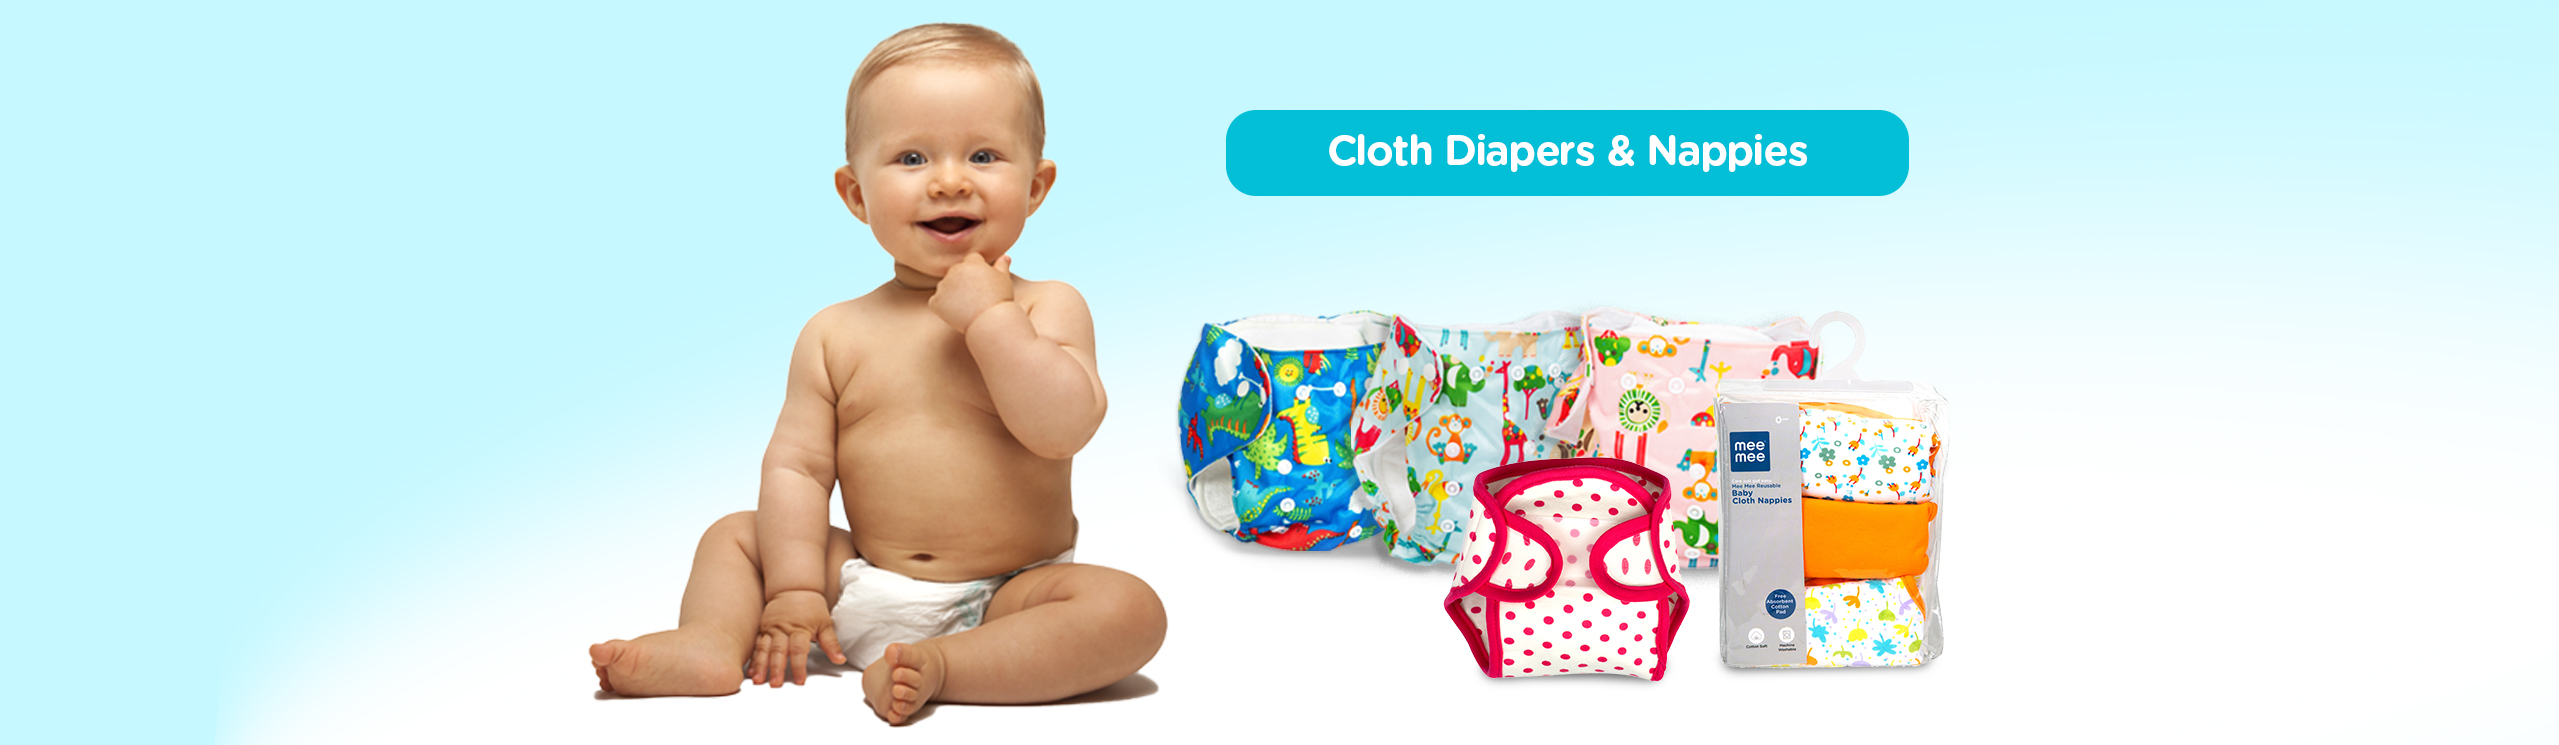 CLOTH DIAPERS & NAPPIES